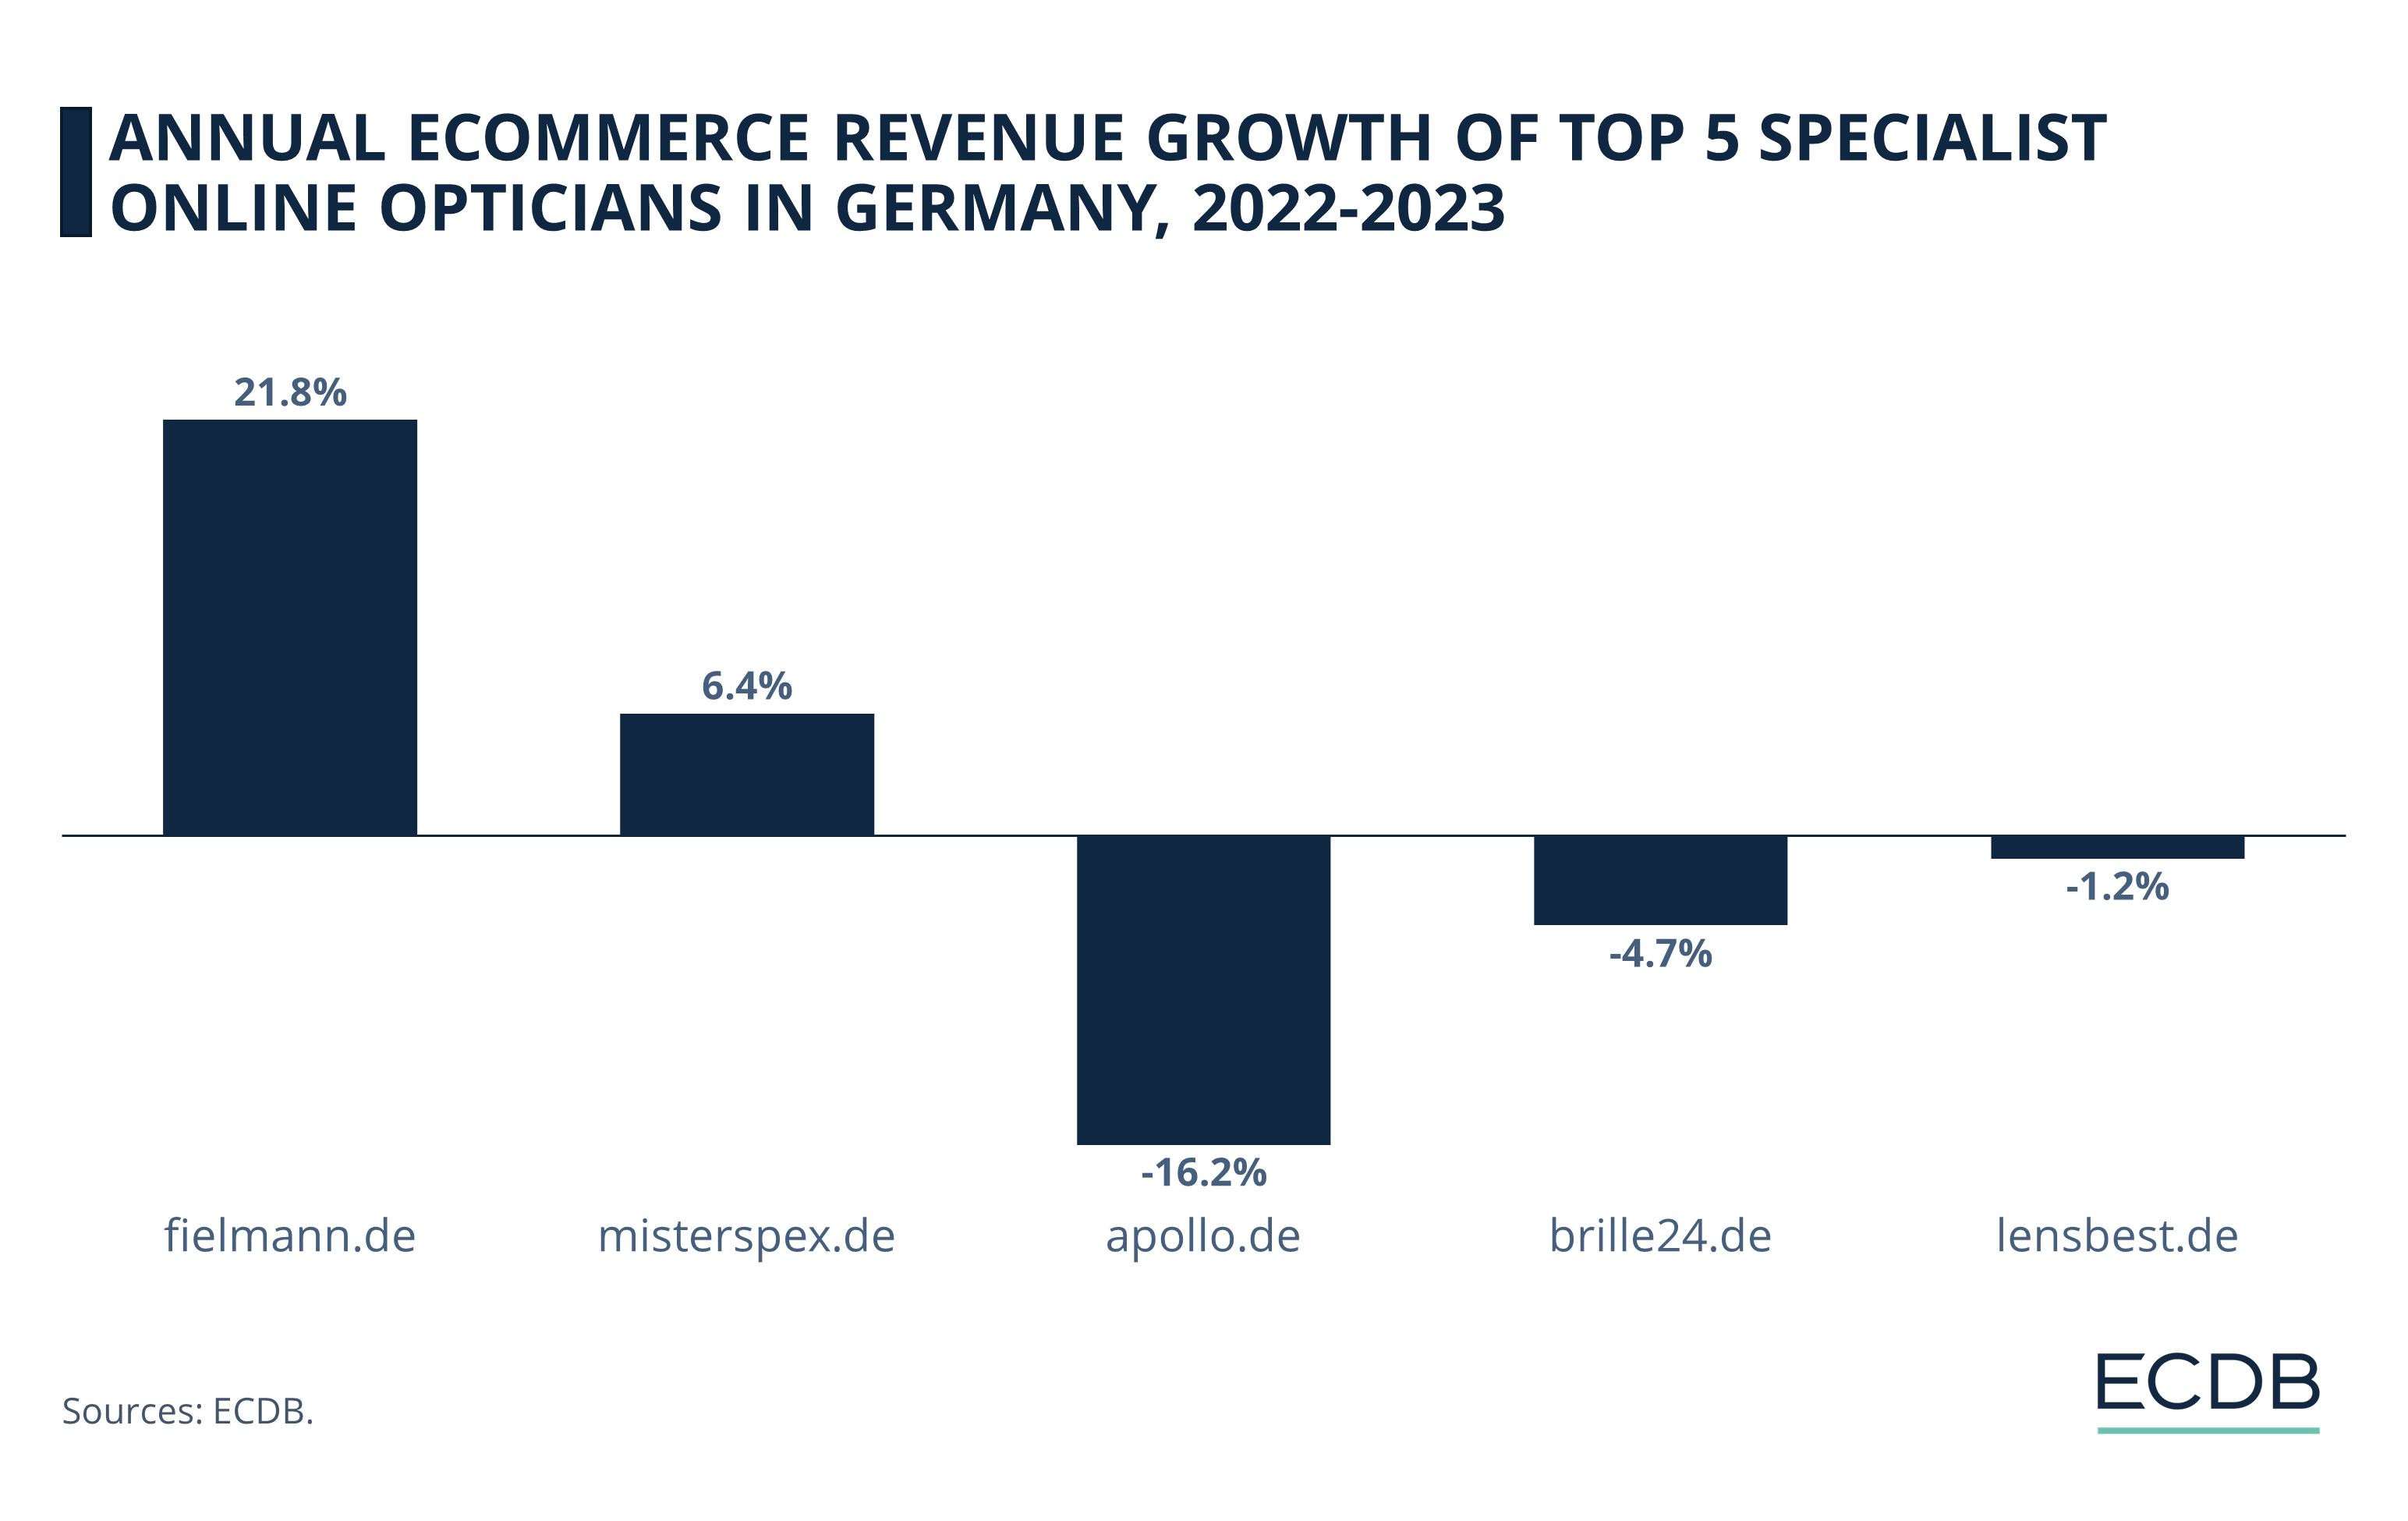 Annual eCommerce Revenue Growth of Top 5 Specialist Online Opticians in Germany, 2022-2023